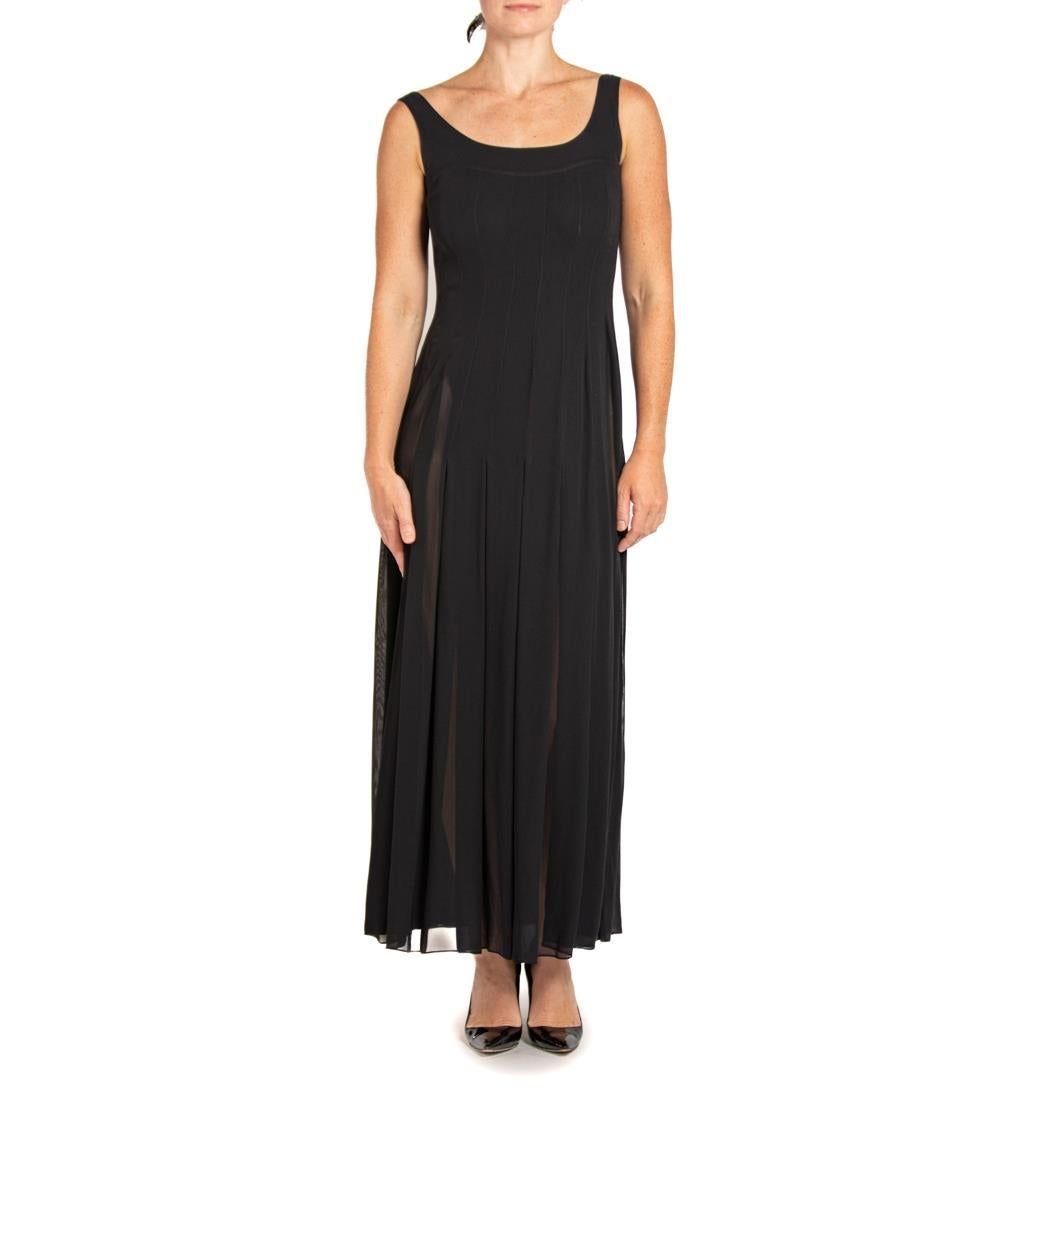 1990S PERRY ELLIS Black Rayon Blend Crepe Chiffon Pleated Dress With Buttons In Excellent Condition For Sale In New York, NY